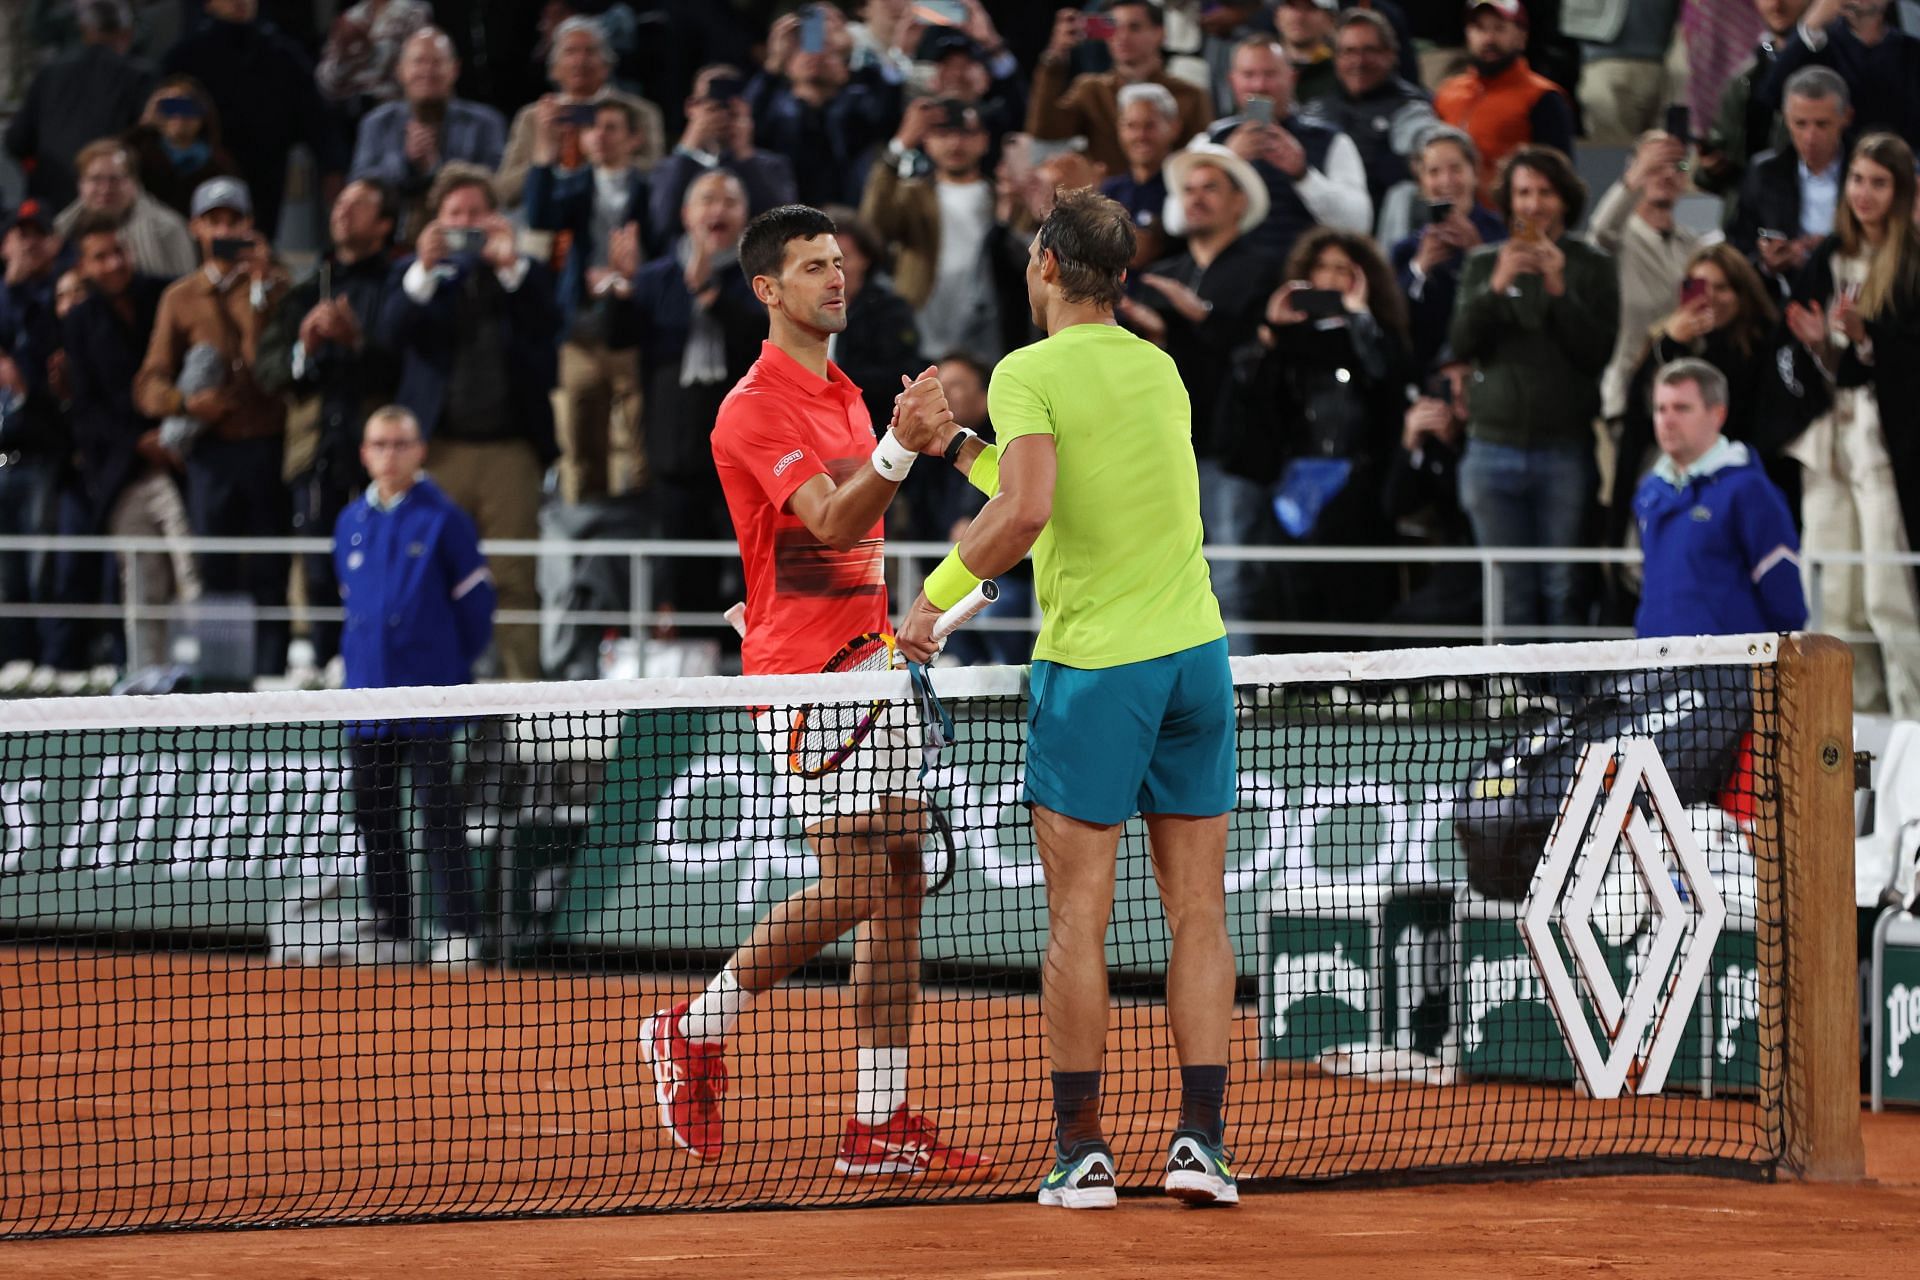 Novak Djokovic was defeated by Rafael Nadal in the 2022 French Open quarterfinals.